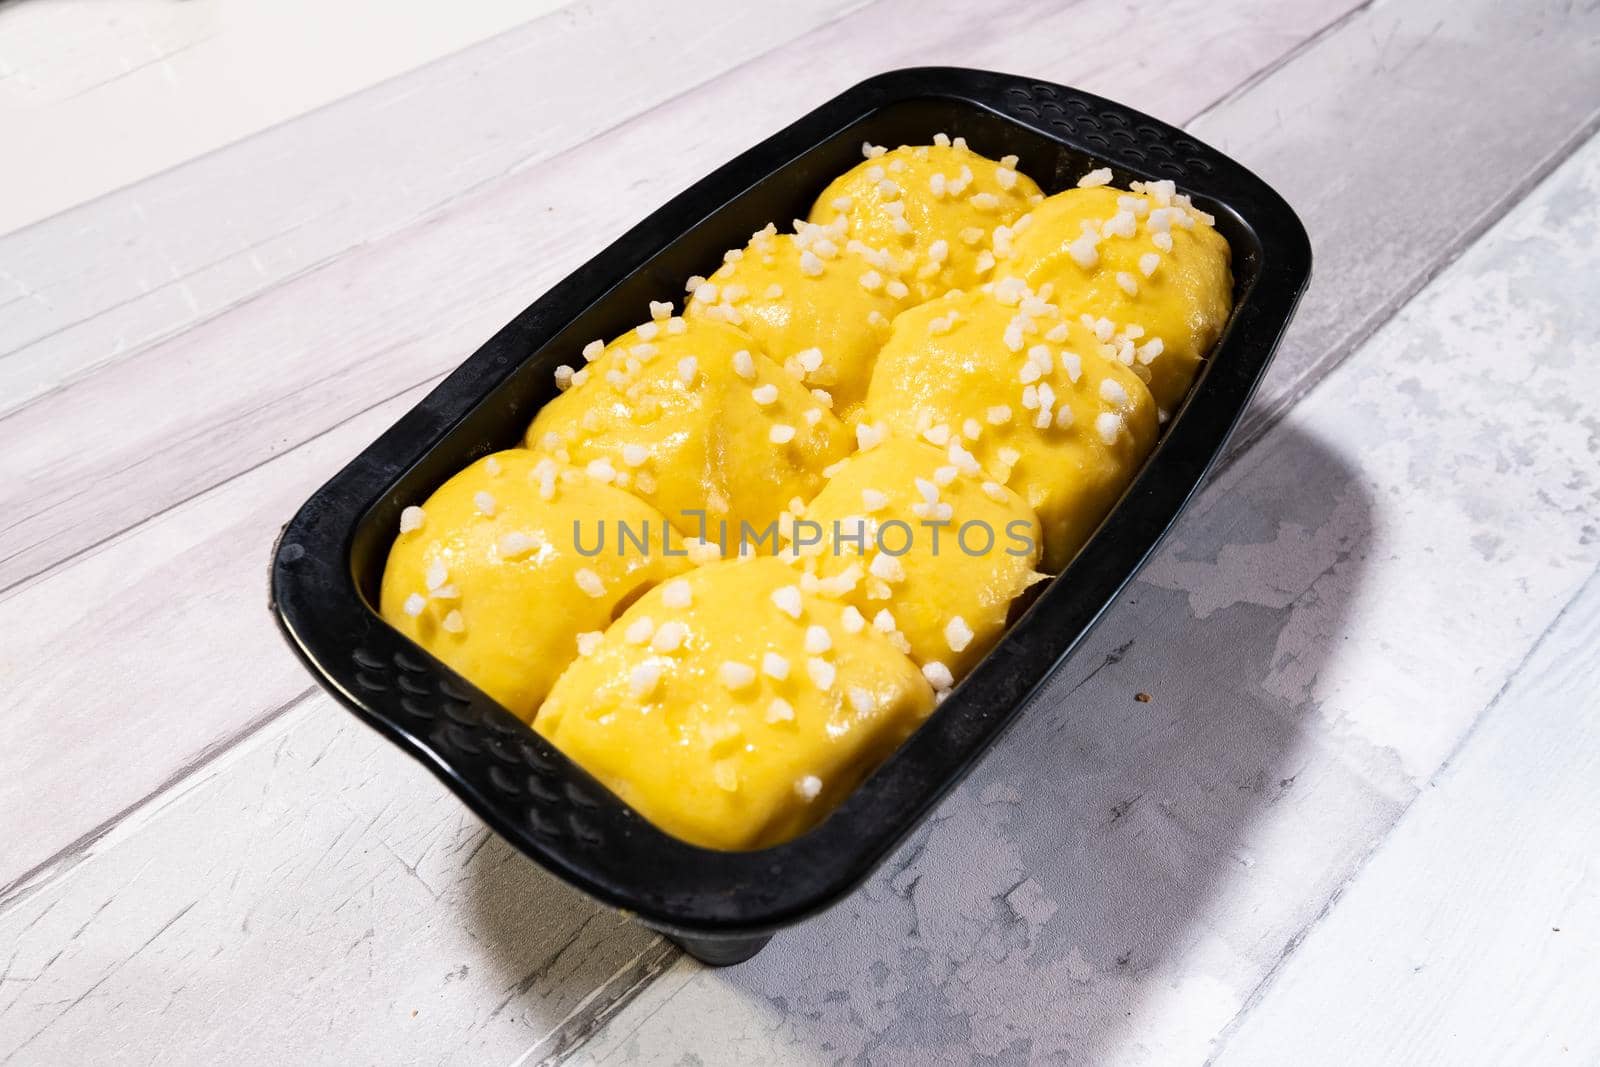 Brioche dough with butter and sugar in a silicone mold before going into the oven